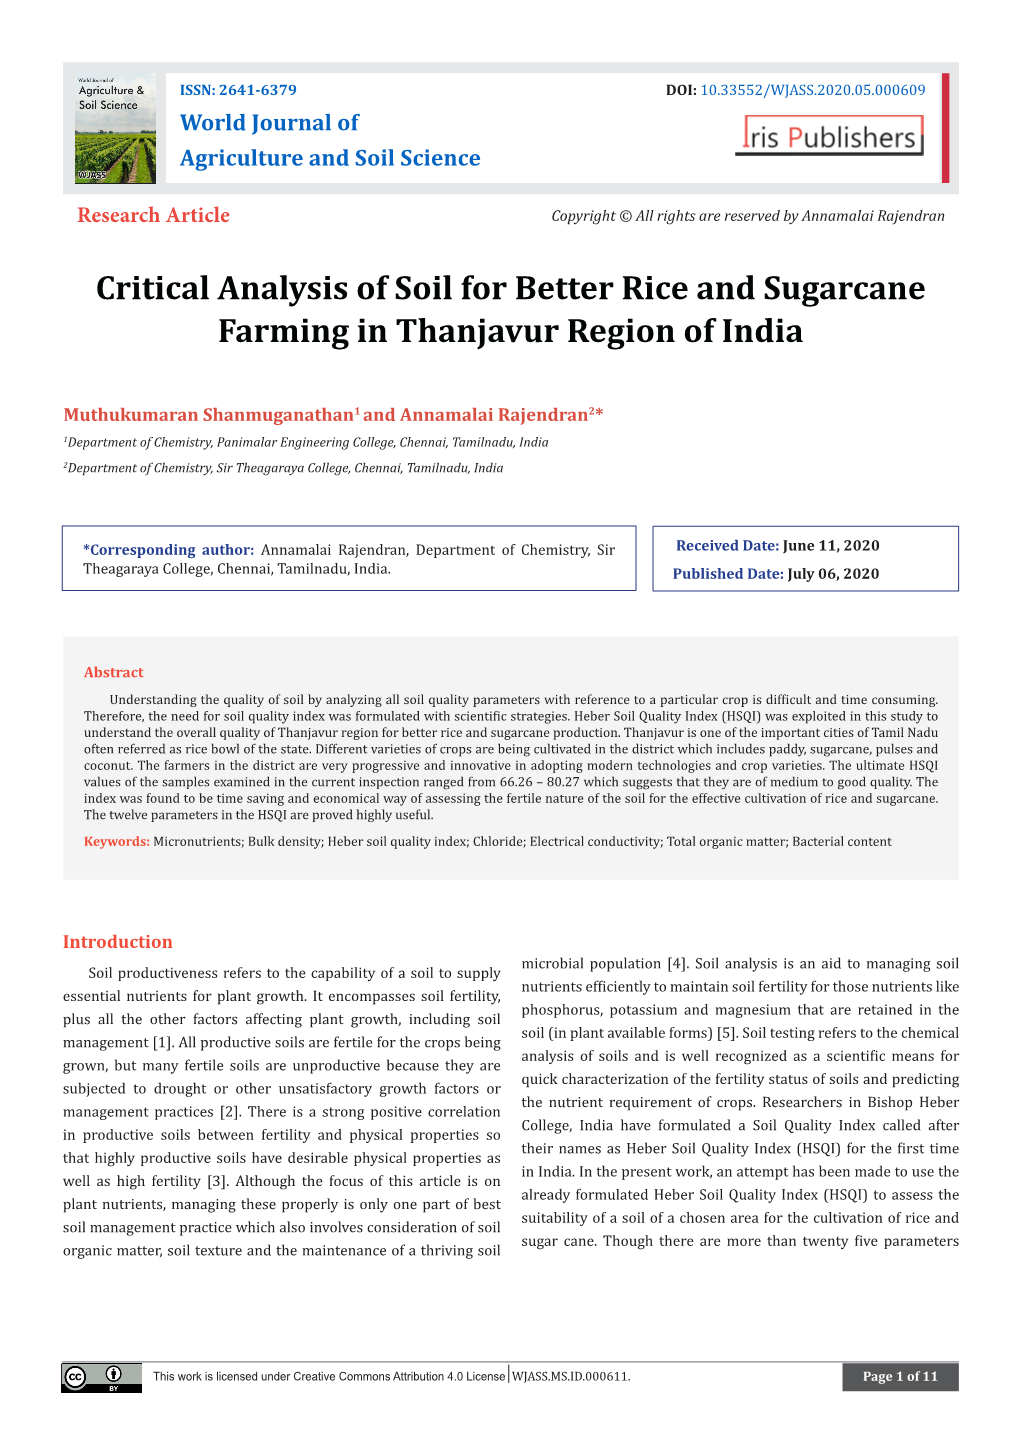 Critical Analysis of Soil for Better Rice and Sugarcane Farming in Thanjavur Region of India